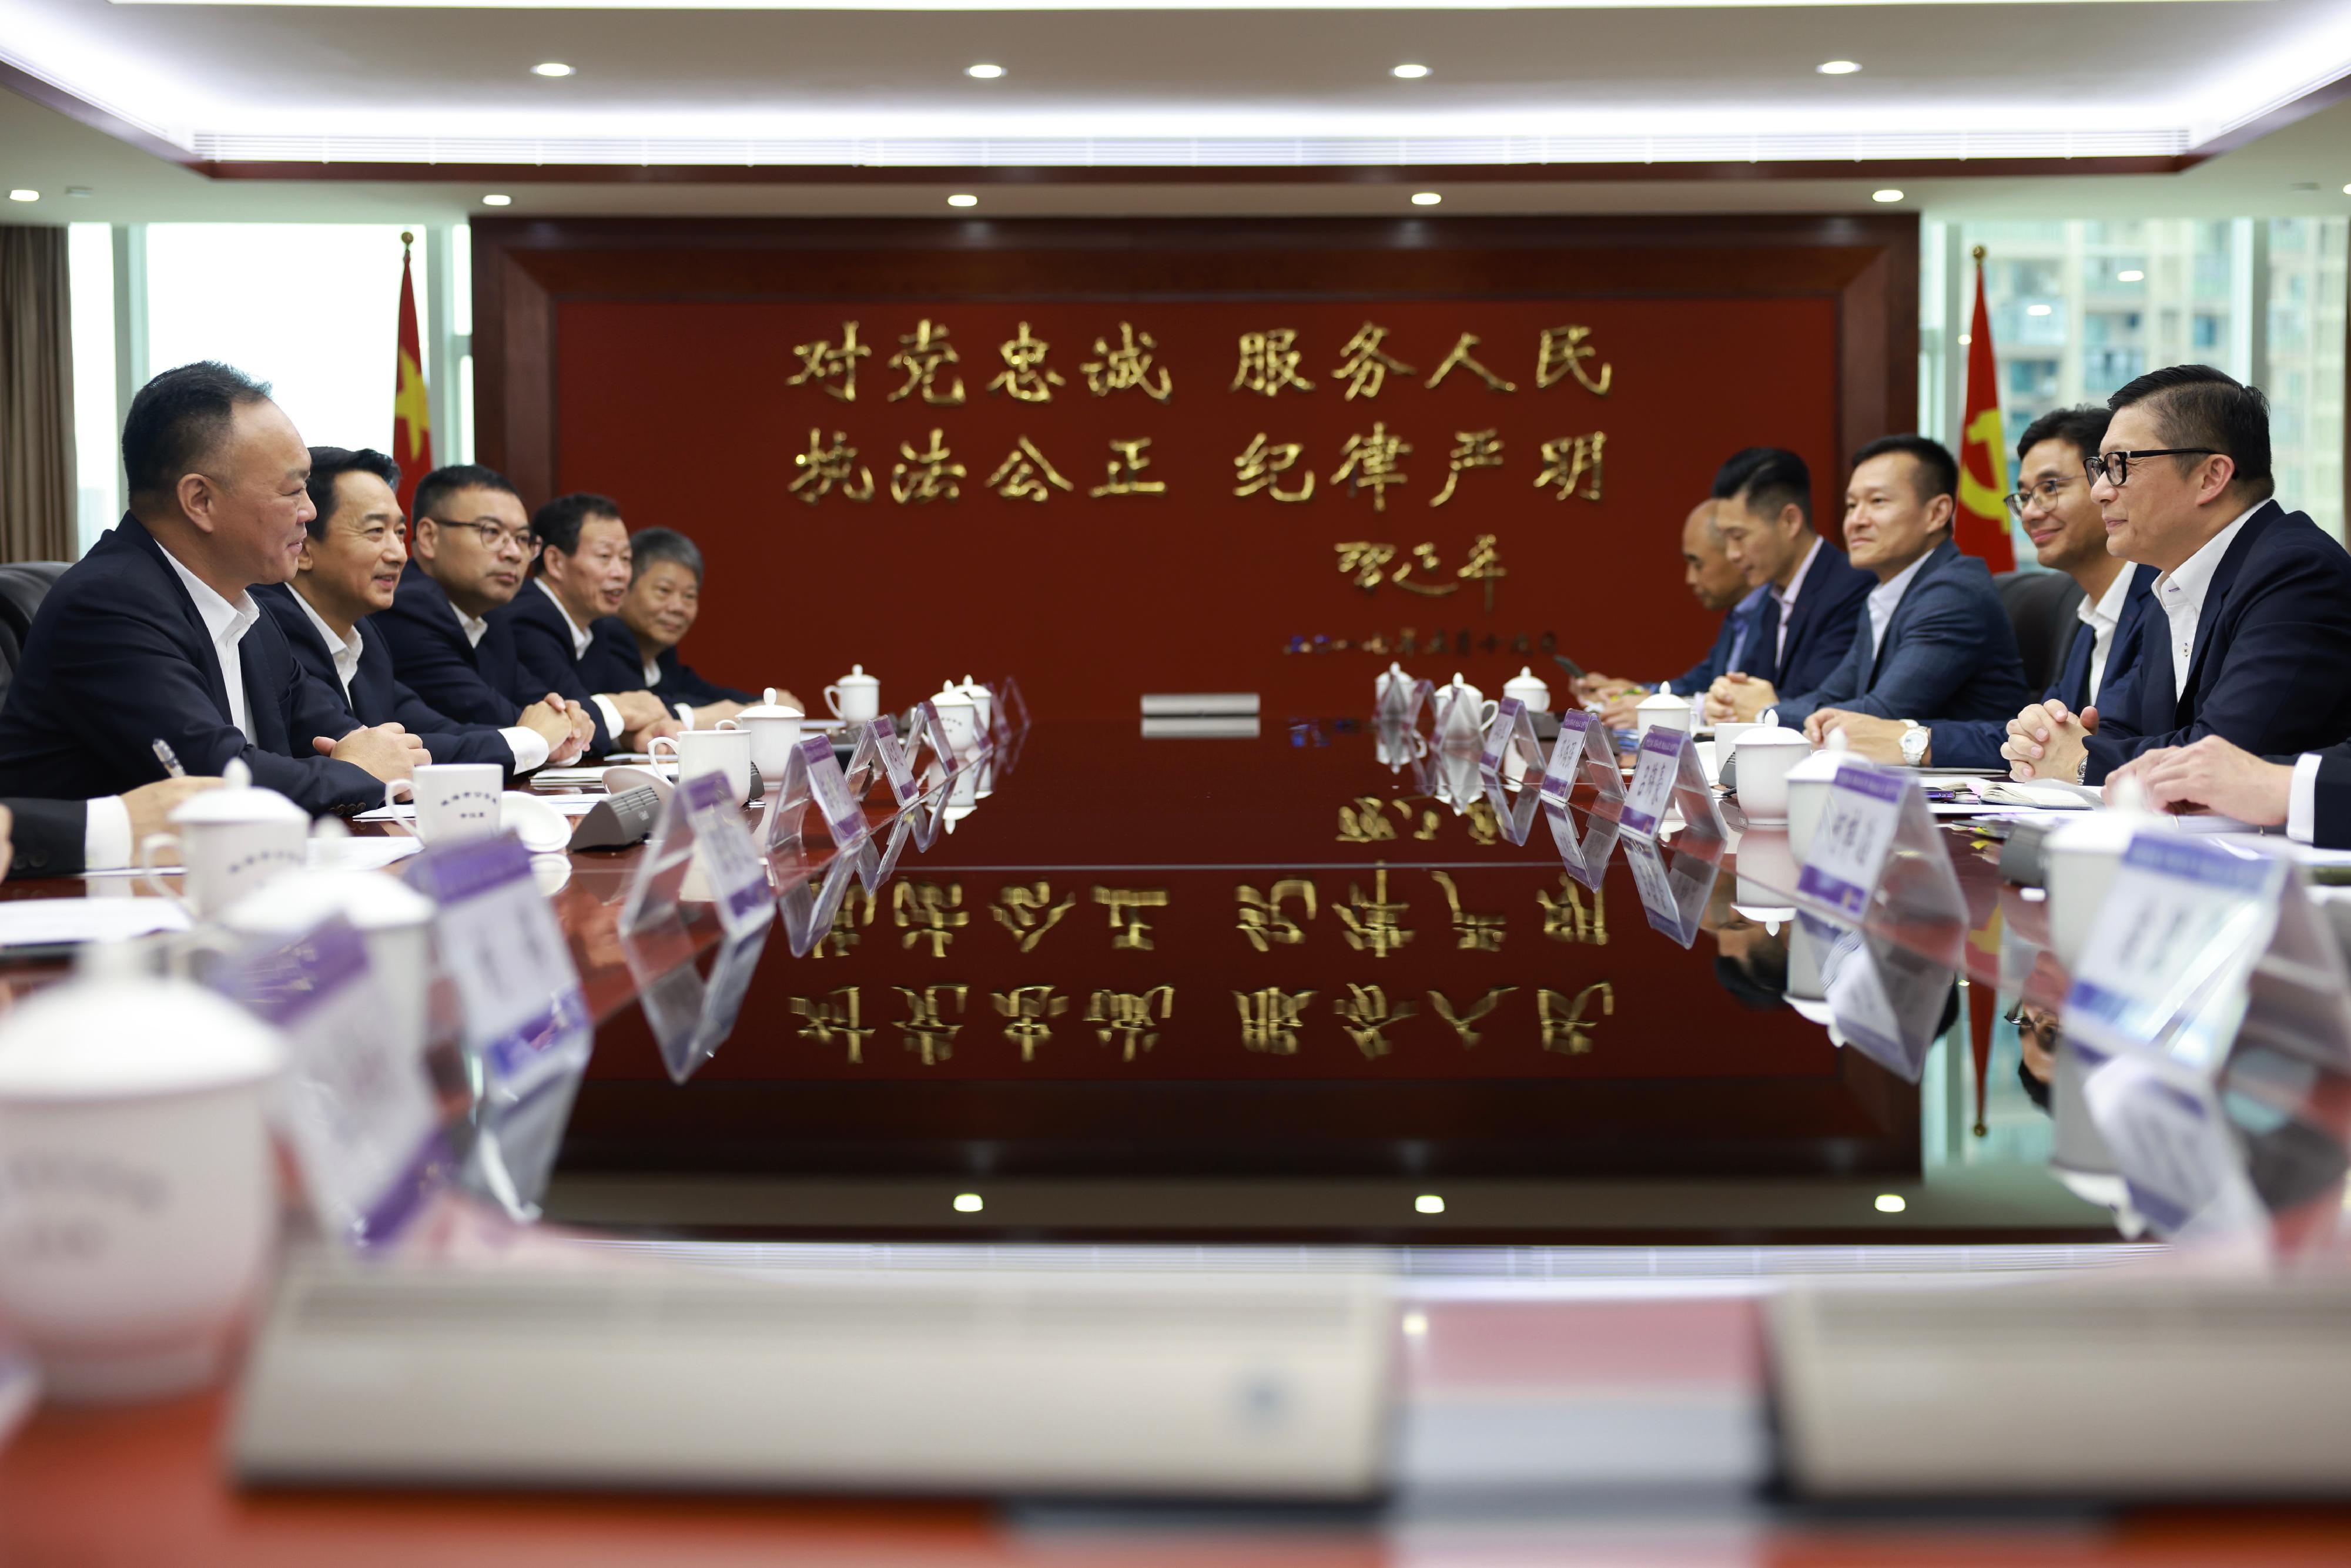 The Secretary for Security, Mr Tang Ping-keung, visited Zhuhai and Jiangmen today (June 21) to continue his visit to the Guangdong-Hong Kong-Macao Greater Bay Area. Photo shows Mr Tang (first right) meeting with the Zhuhai Municipal Public Security Bureau.